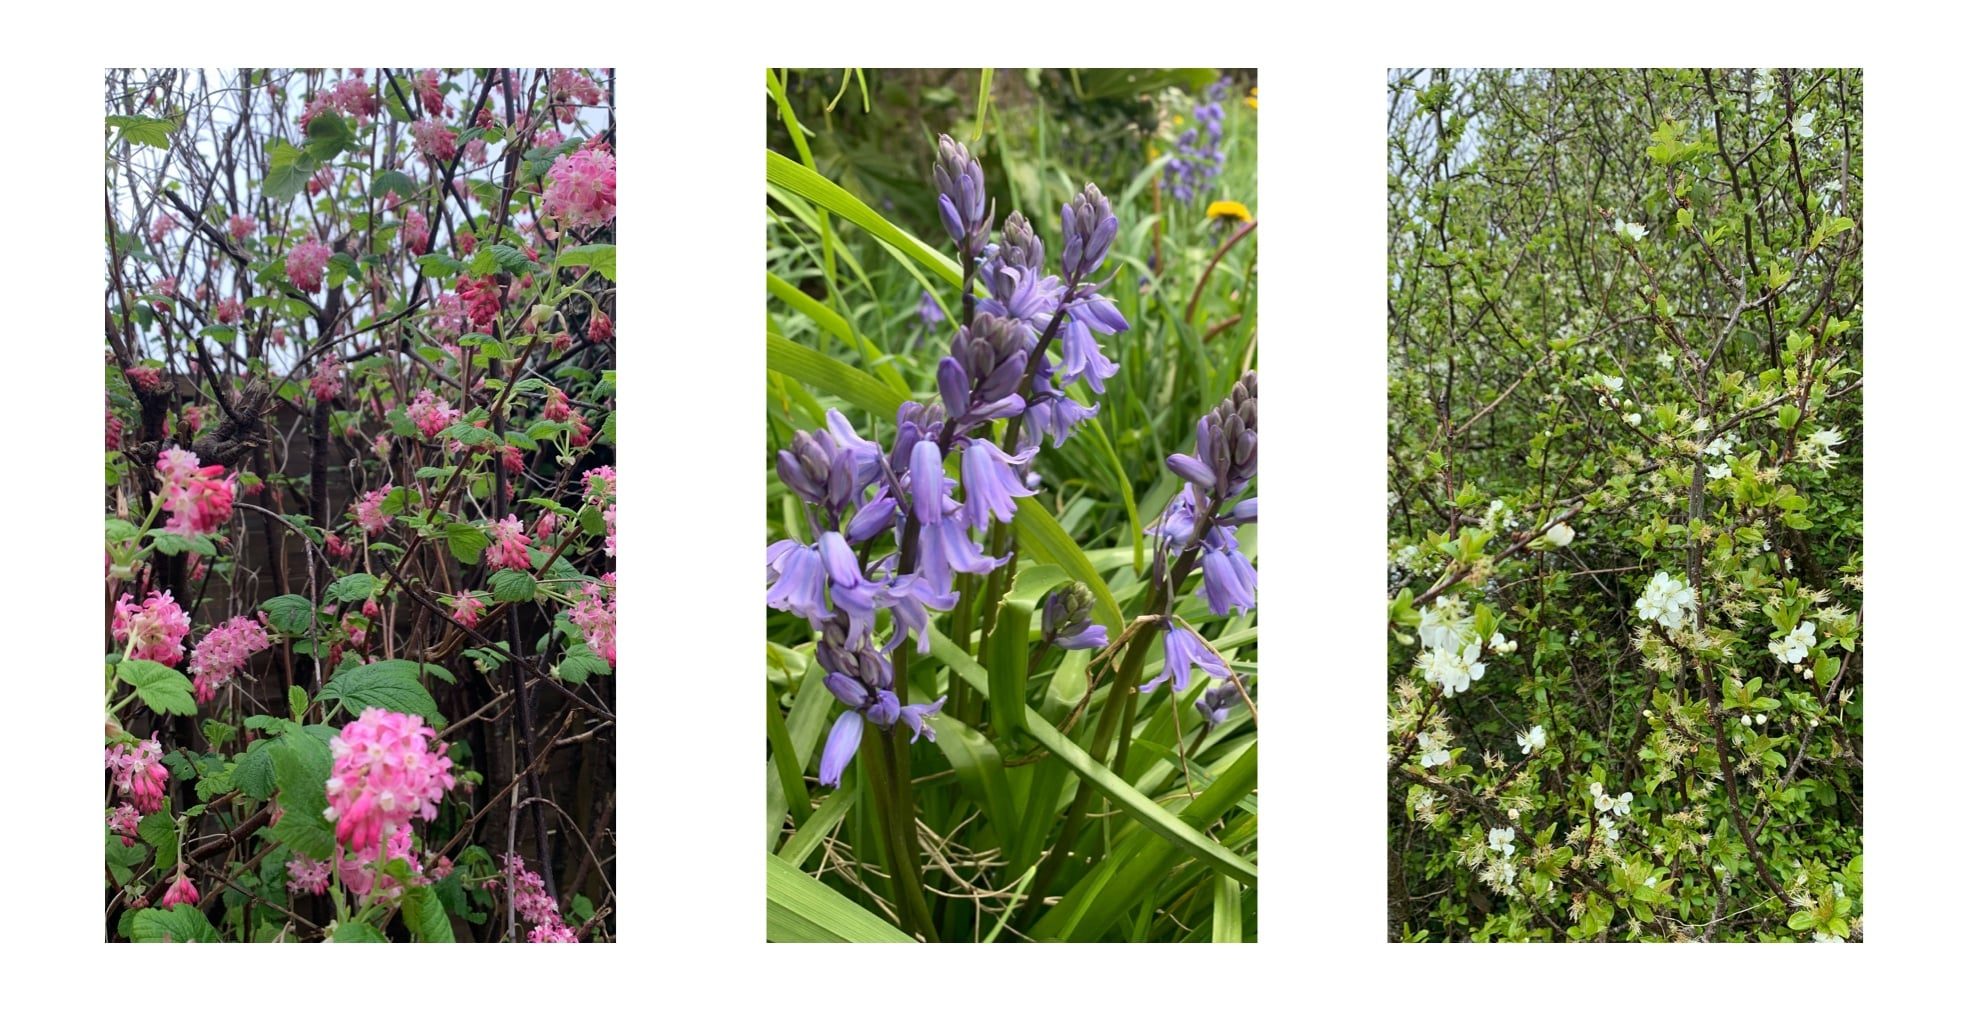 Photos of blossom and bluebells in spring